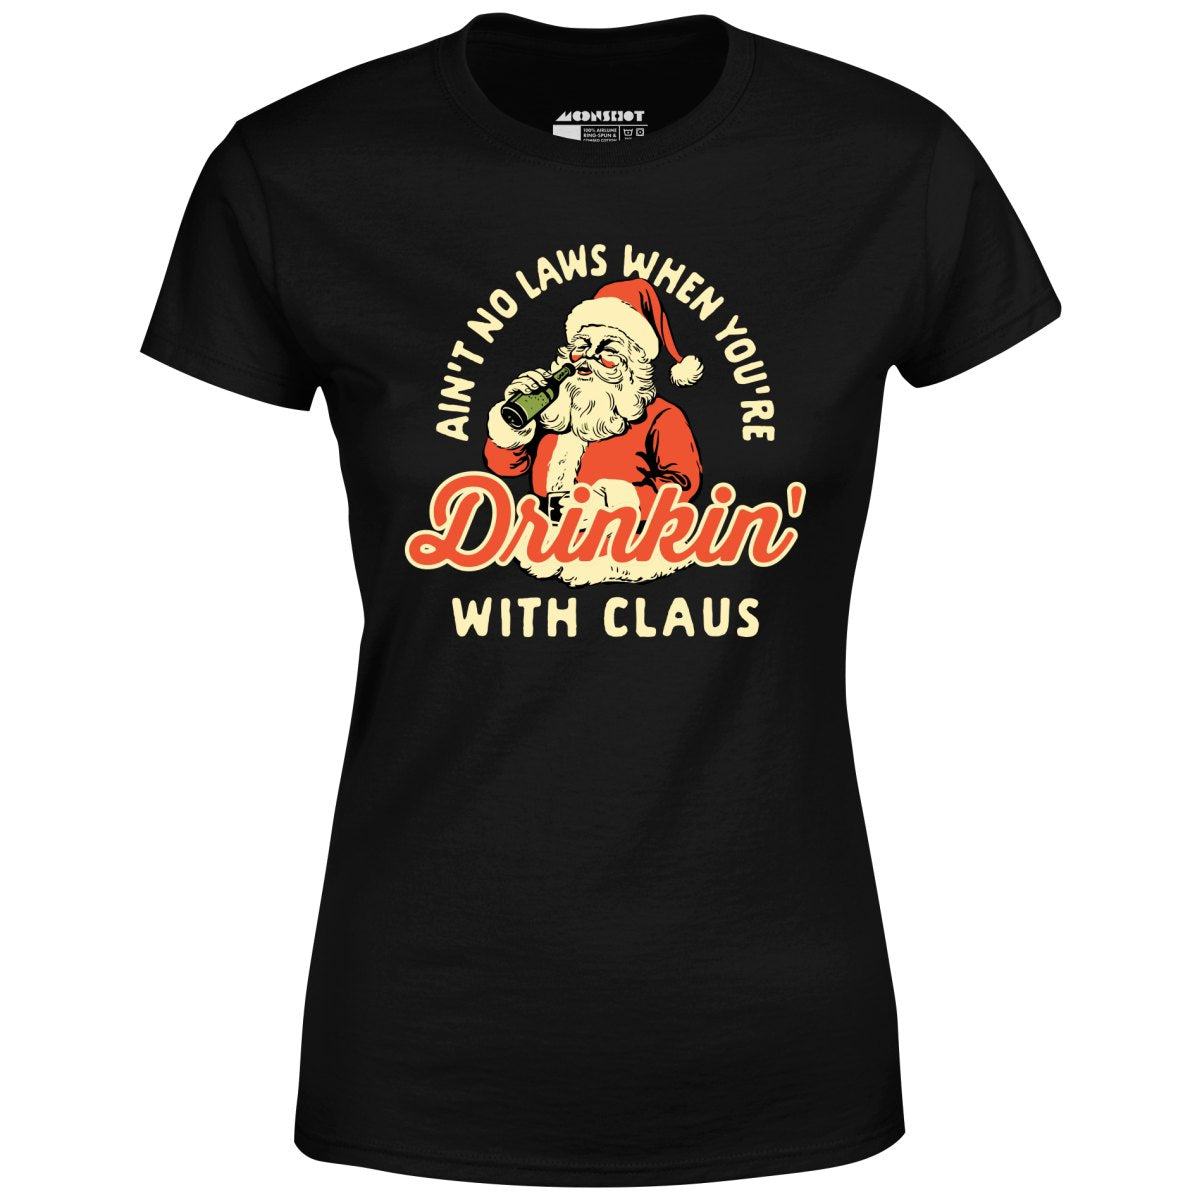 Ain't No Laws When You're Drinkin' With Claus - Women's T-Shirt